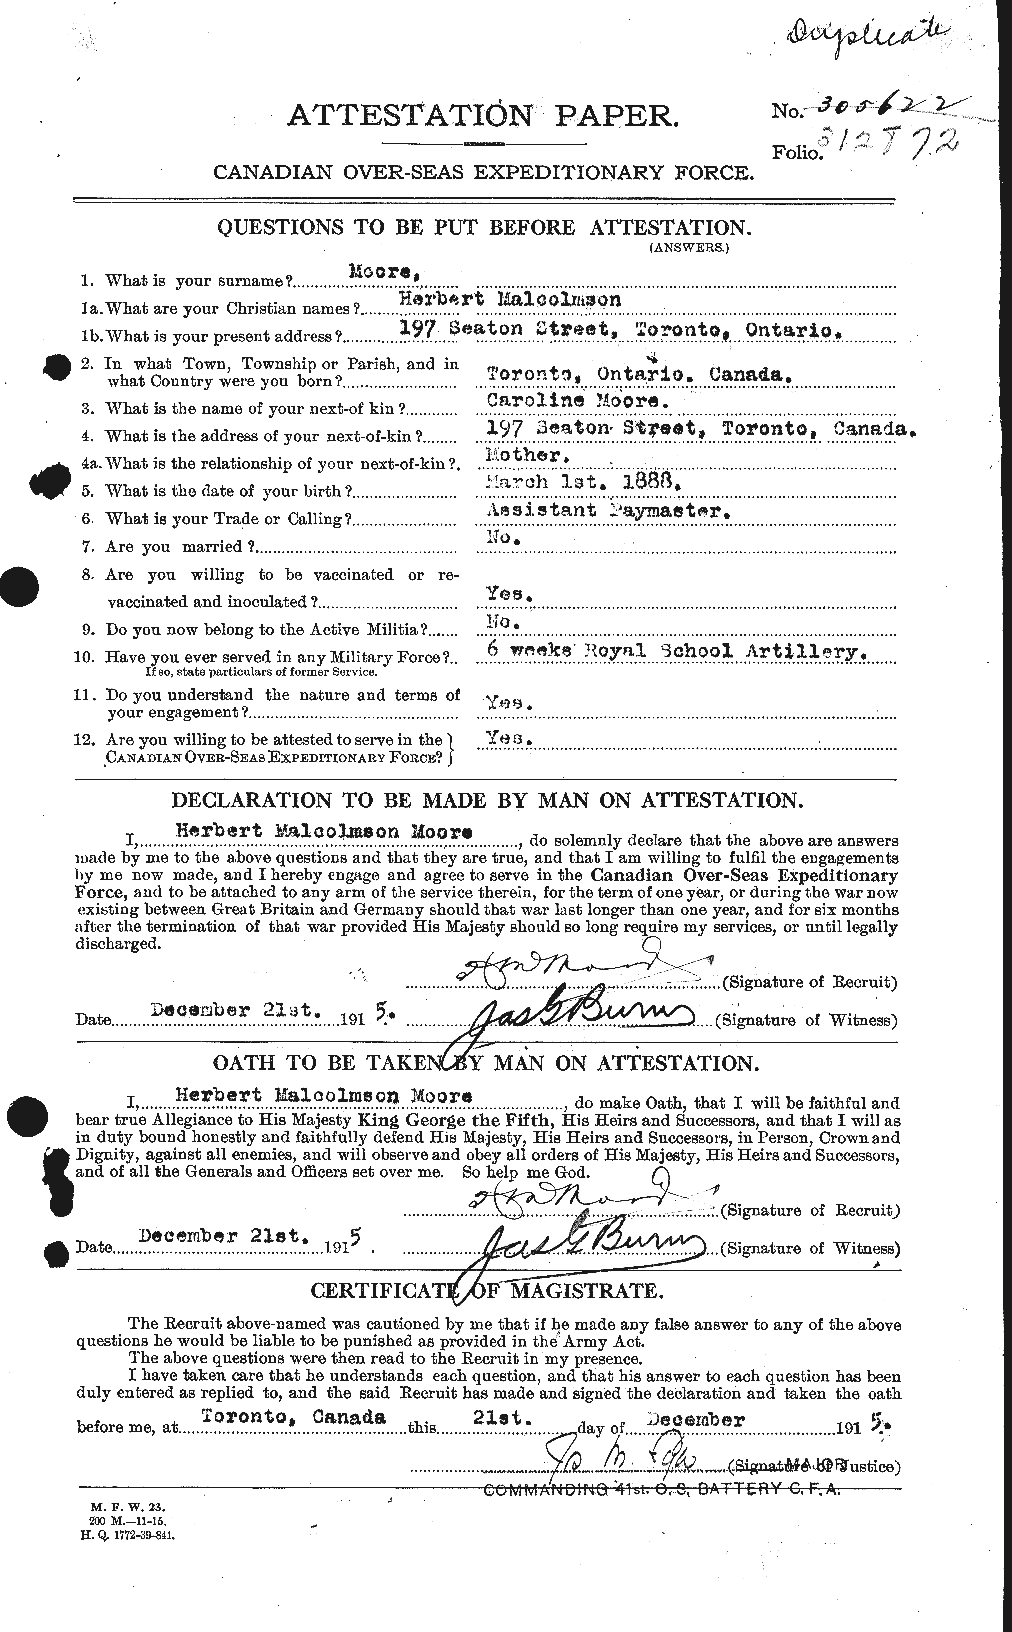 Personnel Records of the First World War - CEF 502121a